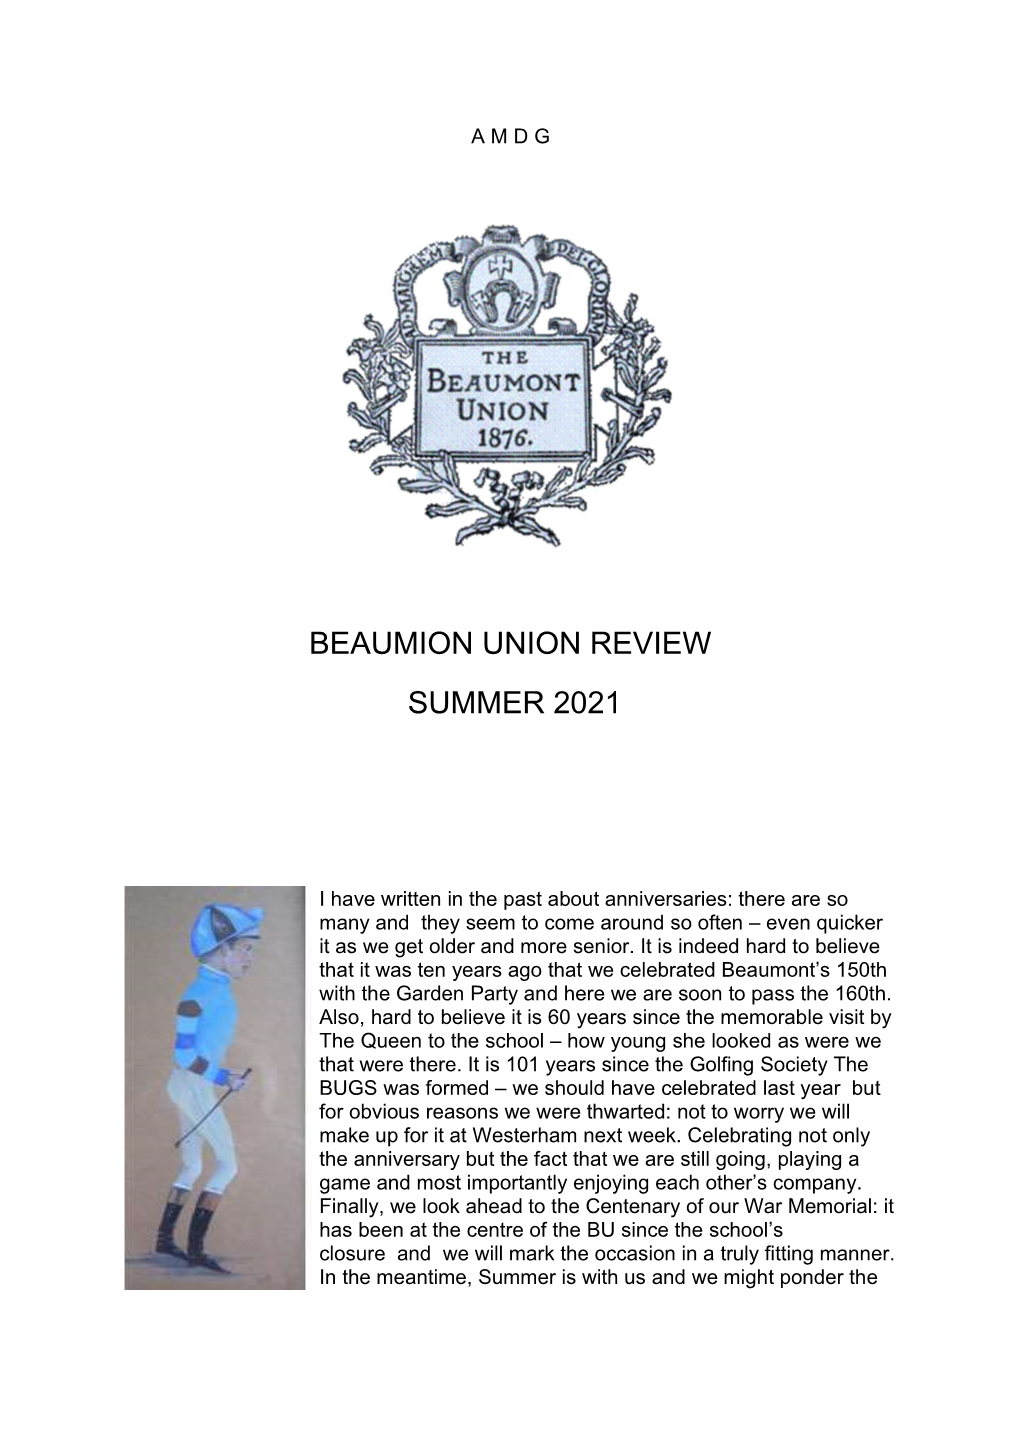 Beaumion Union Review Summer 2021